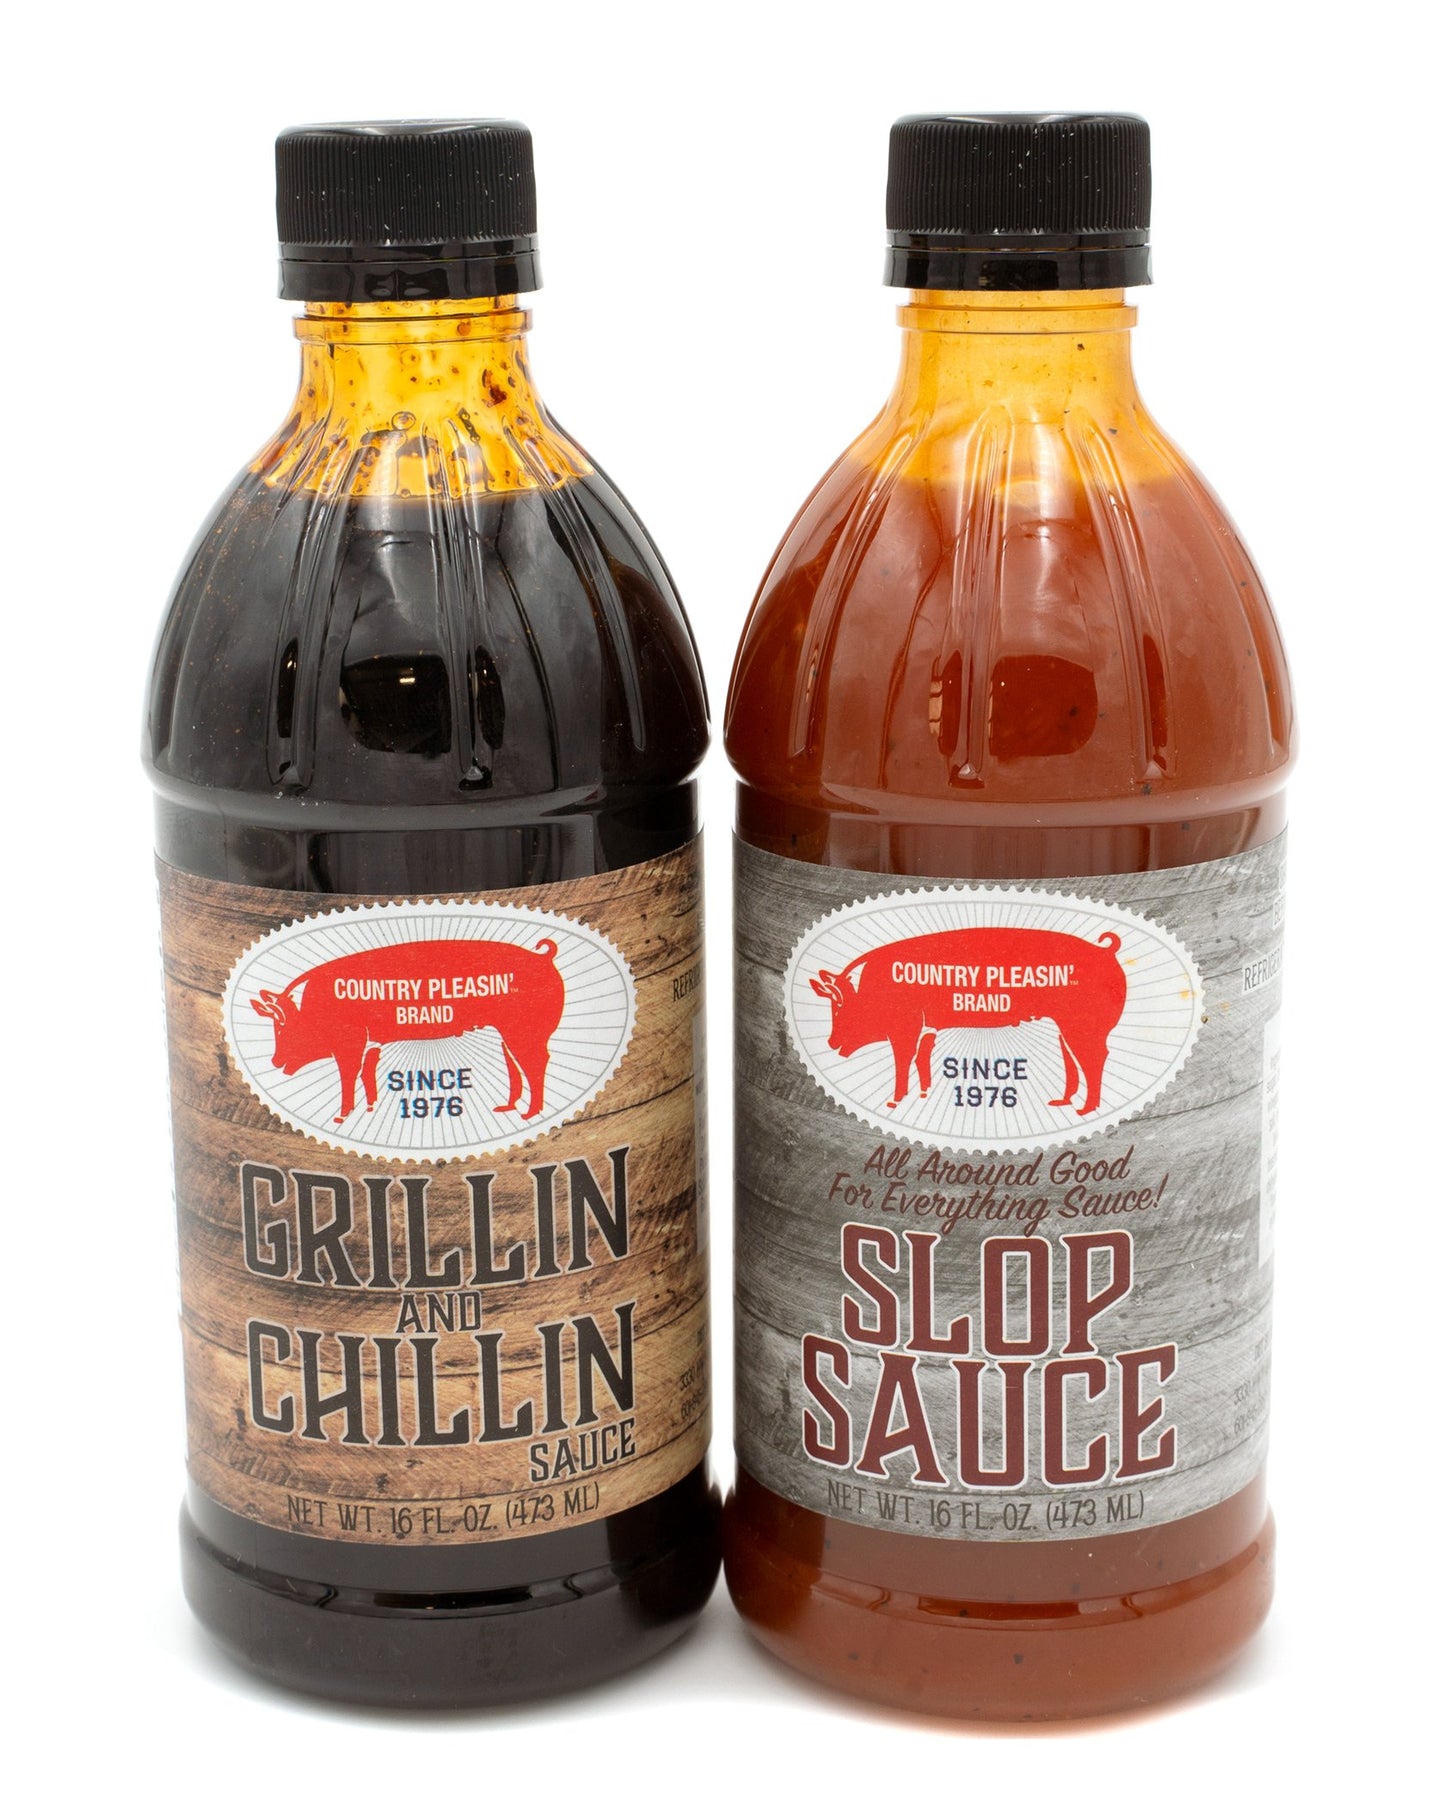 Country Pleasin' Brand - 2 Sauce Pack (Grillin Chillin & Slop Sauce)